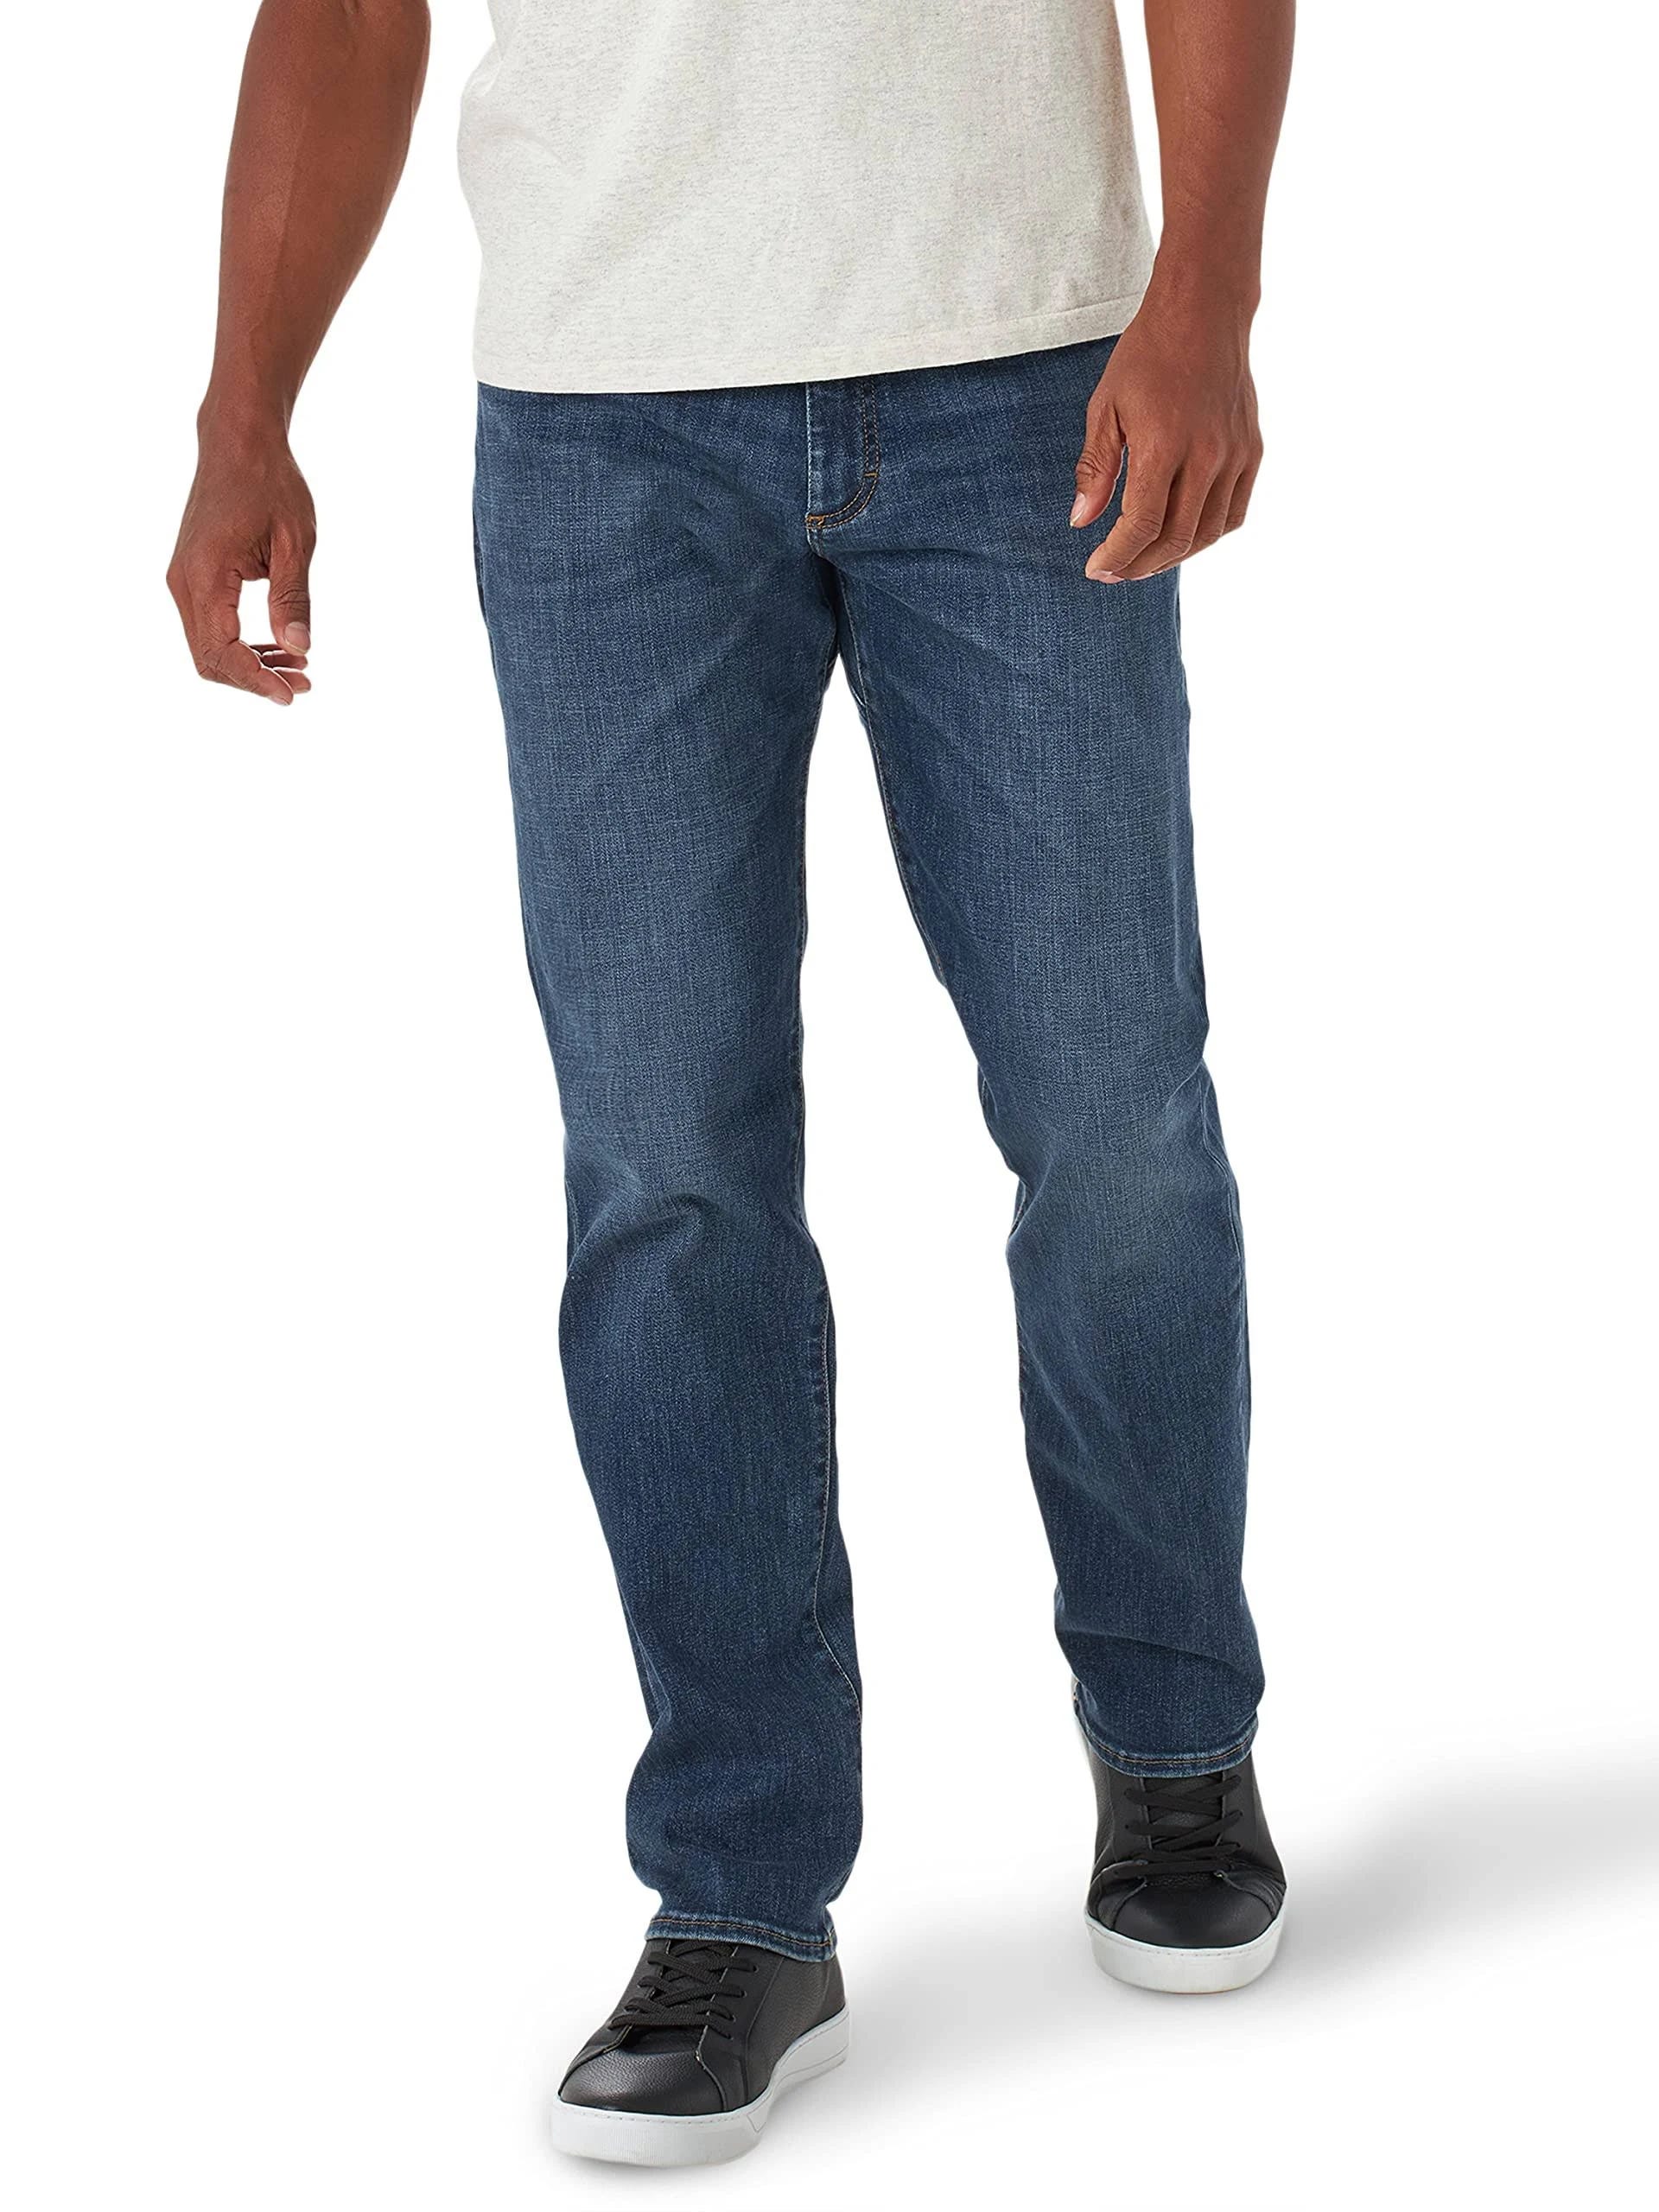 Extreme Comfort: Lee Men's Straight Taper Jeans for Flexible Style and Motion | Image